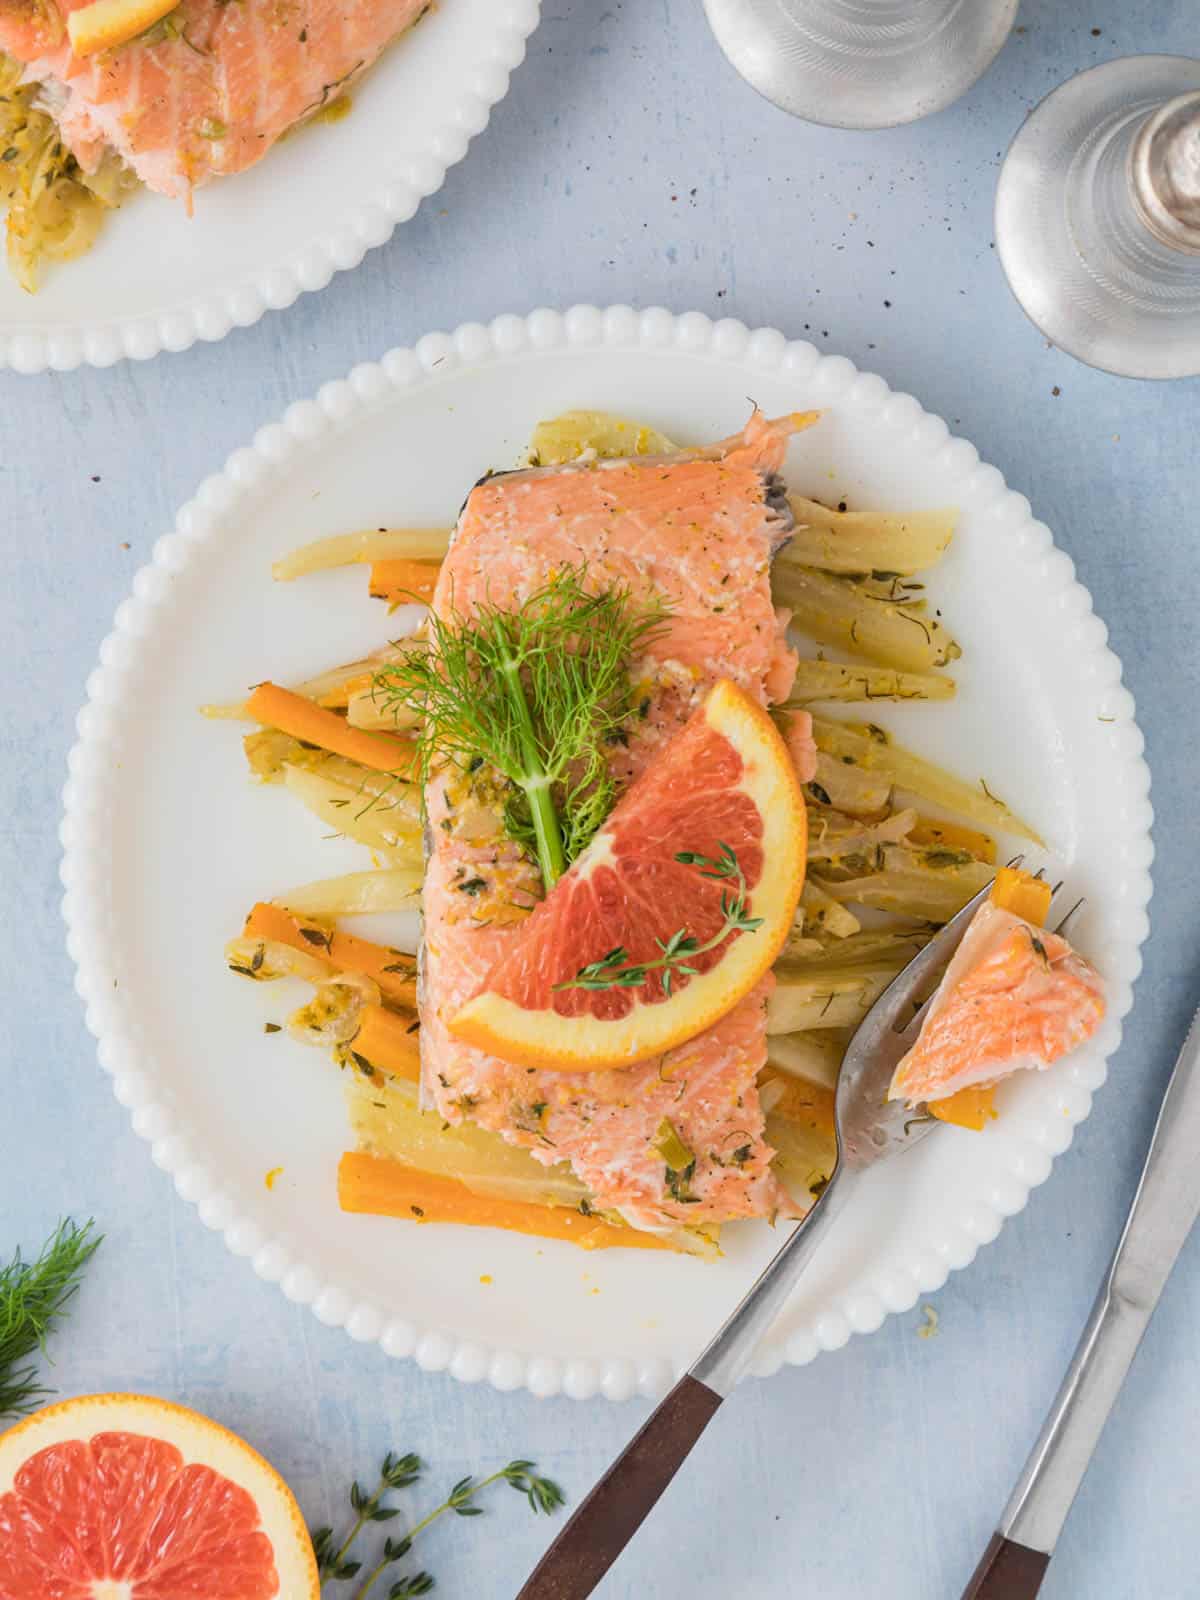 Salmon with carrots and fennel on a white plate topped with fresh herbs.